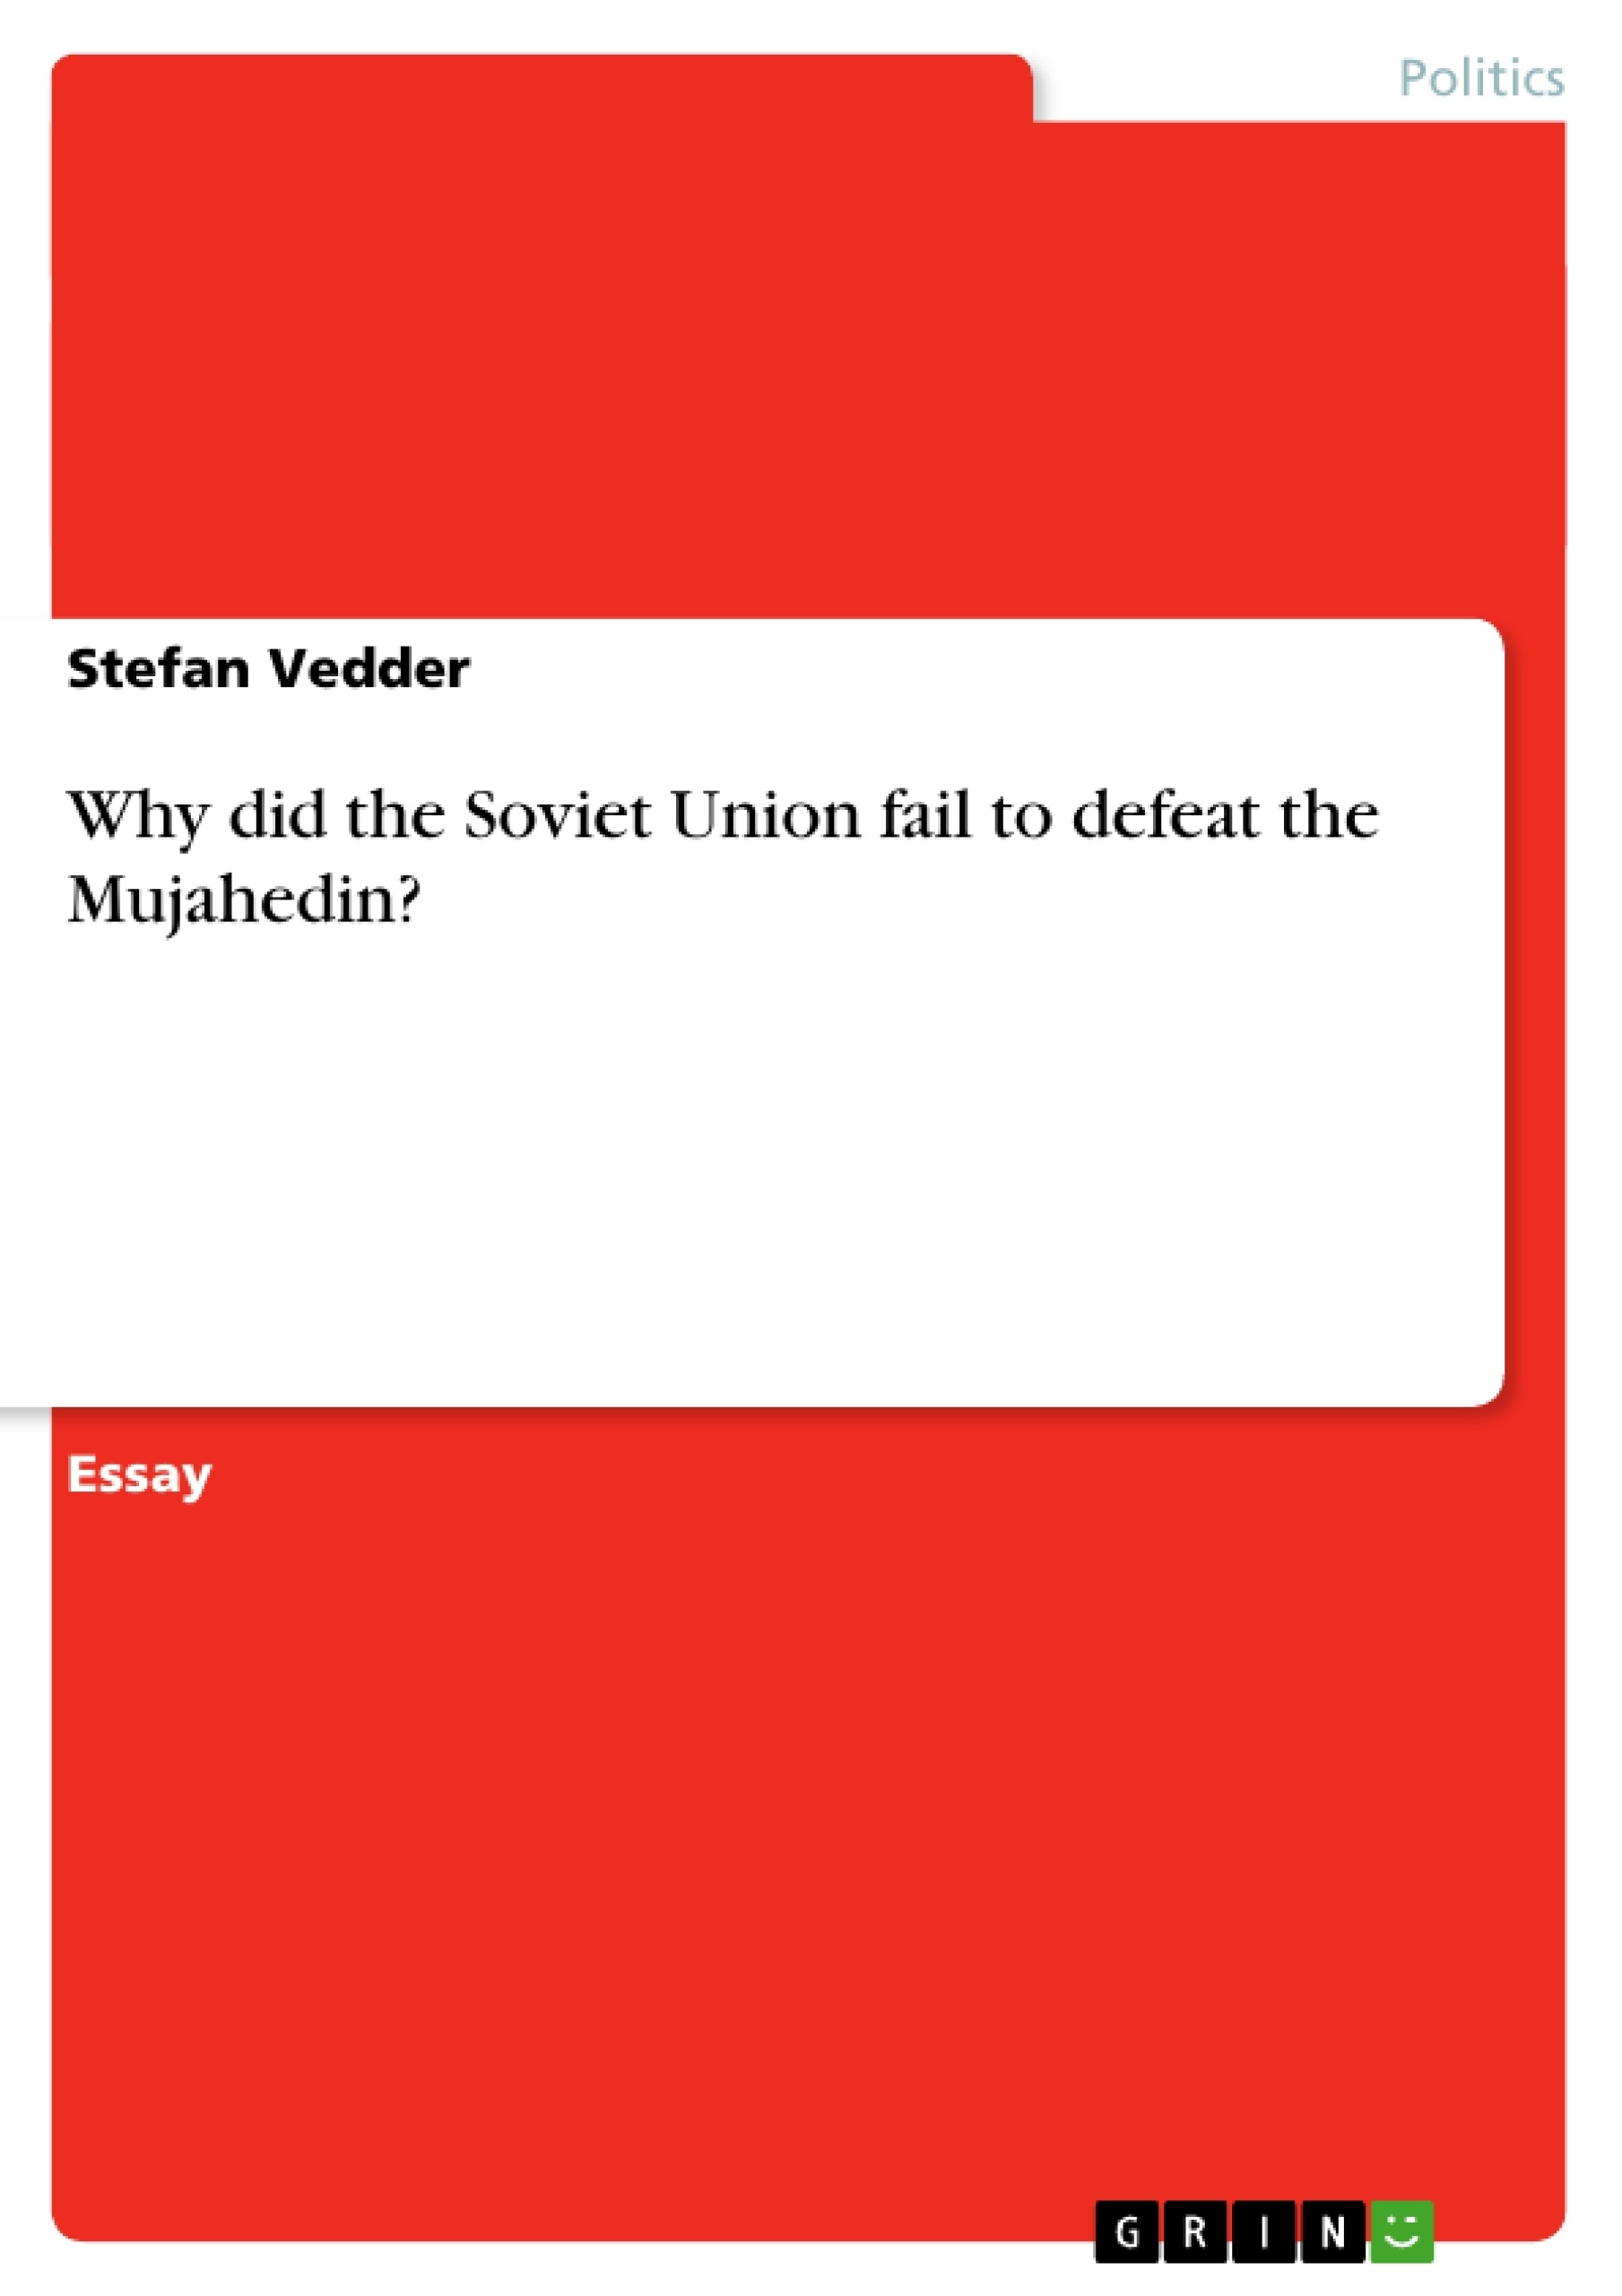 Título: Why did the Soviet Union fail to defeat the Mujahedin?